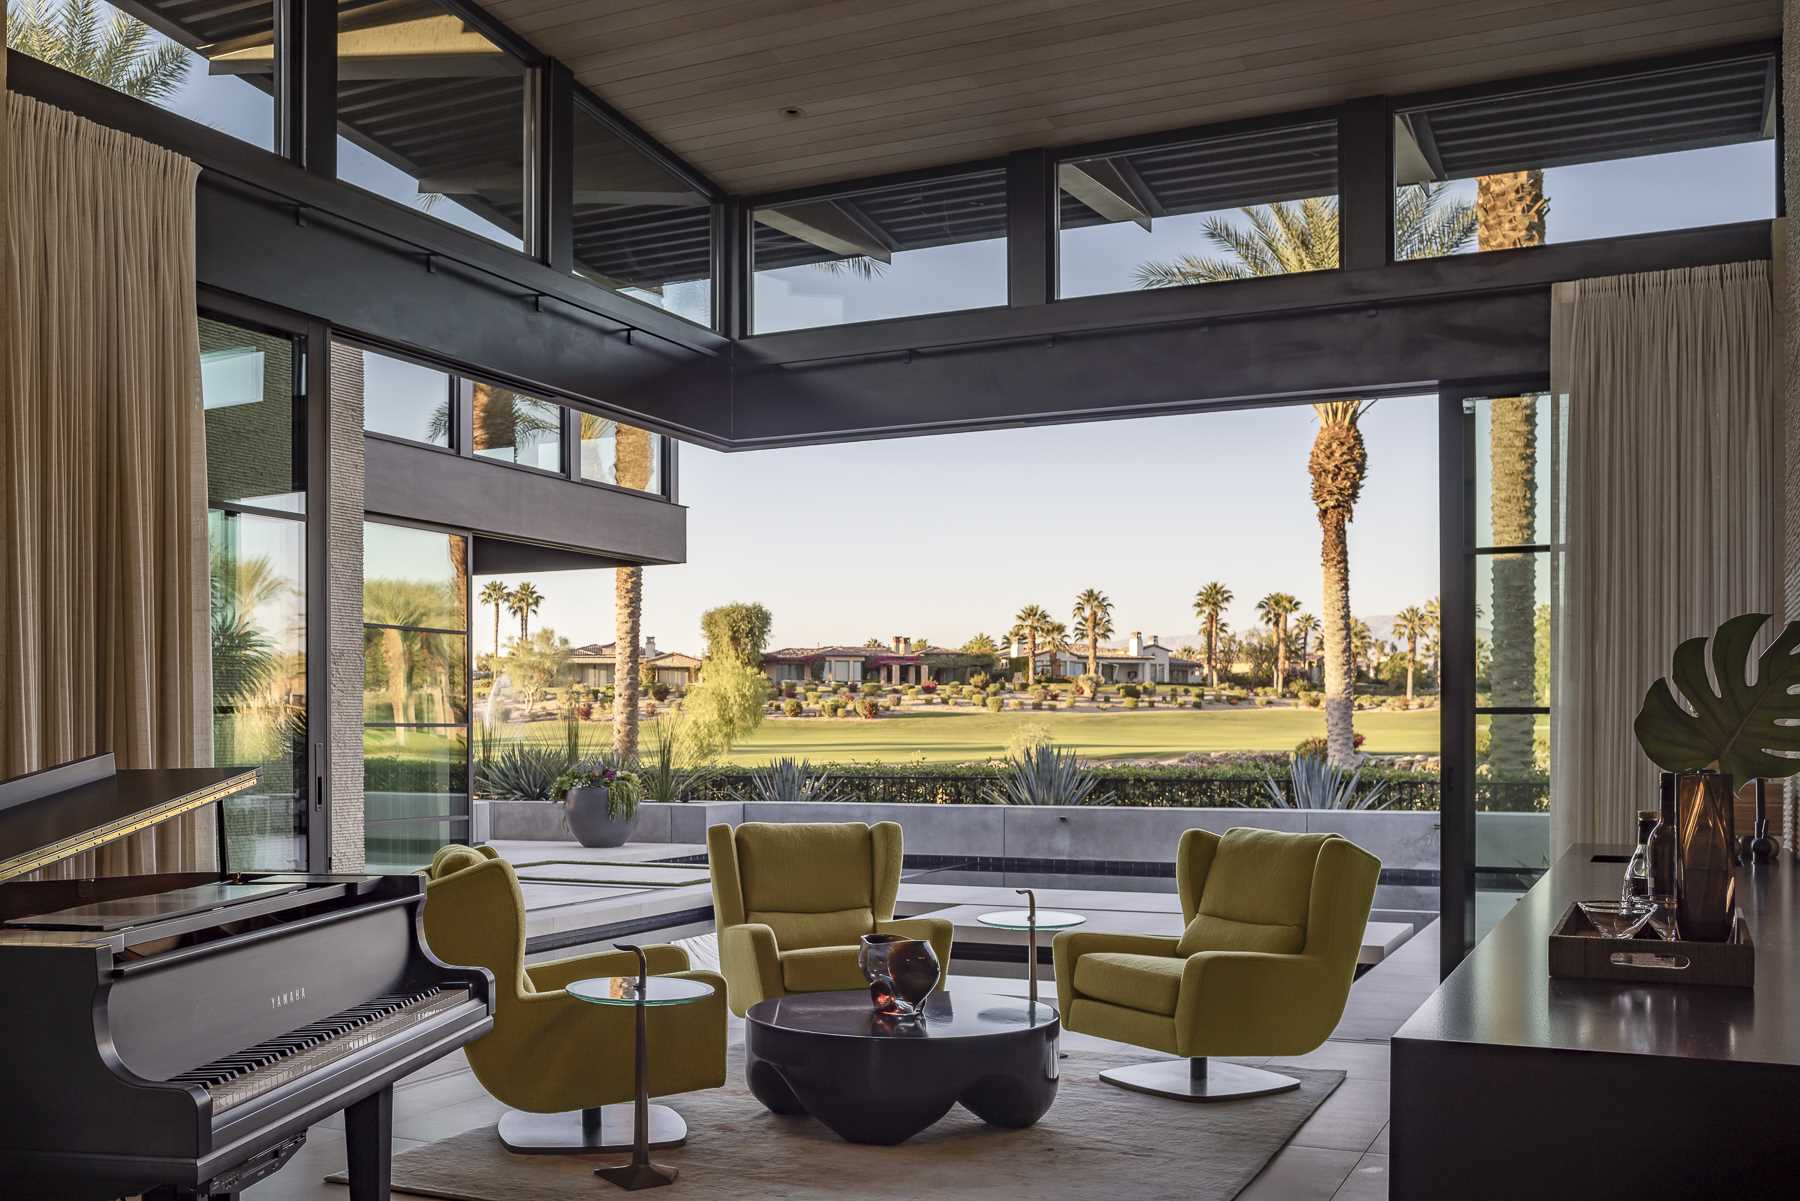 The interior ceiling of this modern ،use transitions from wood to steel decking at the exterior, meeting the owners' preference for durable materials in a harsh climate, while the gl، walls open to connect with the outdoors.